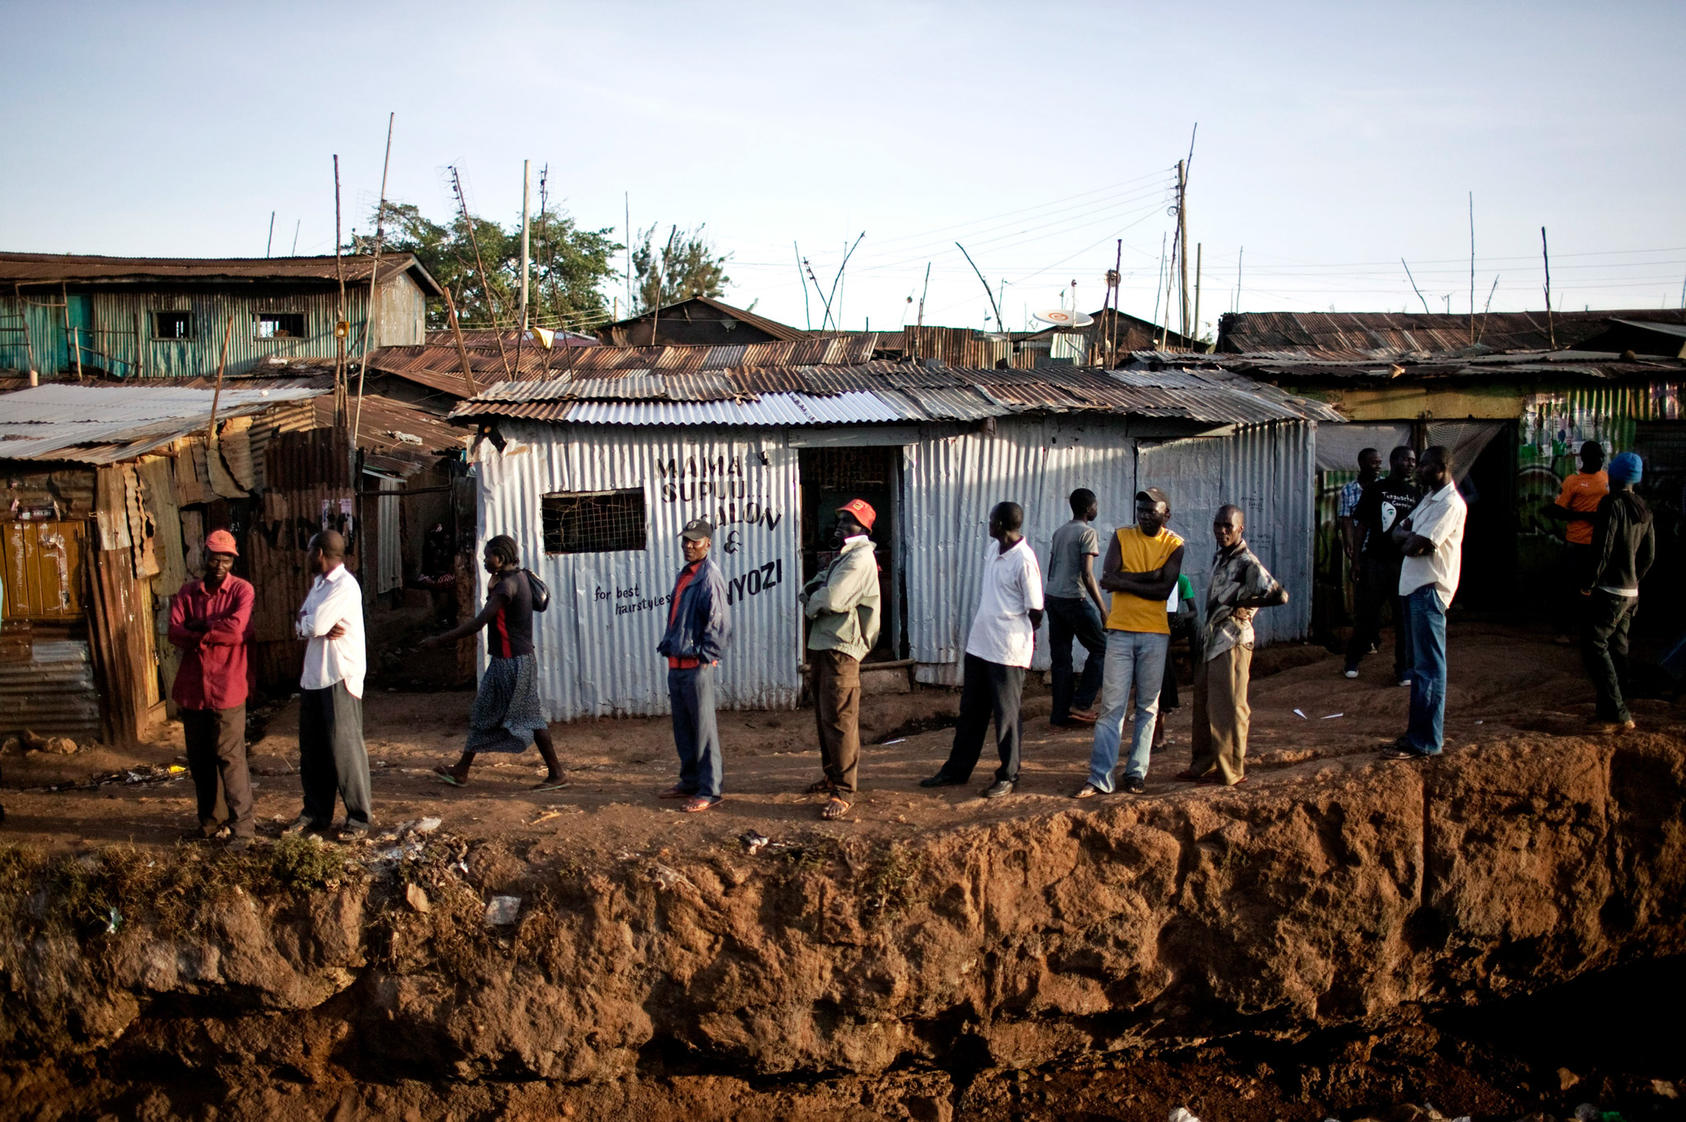 Residents look on as supporters of presidential candidate Raila Odinga gather in the Kibera area of Nairobi, Kenya. Photo Courtesy of The New York Times/Pete Muller